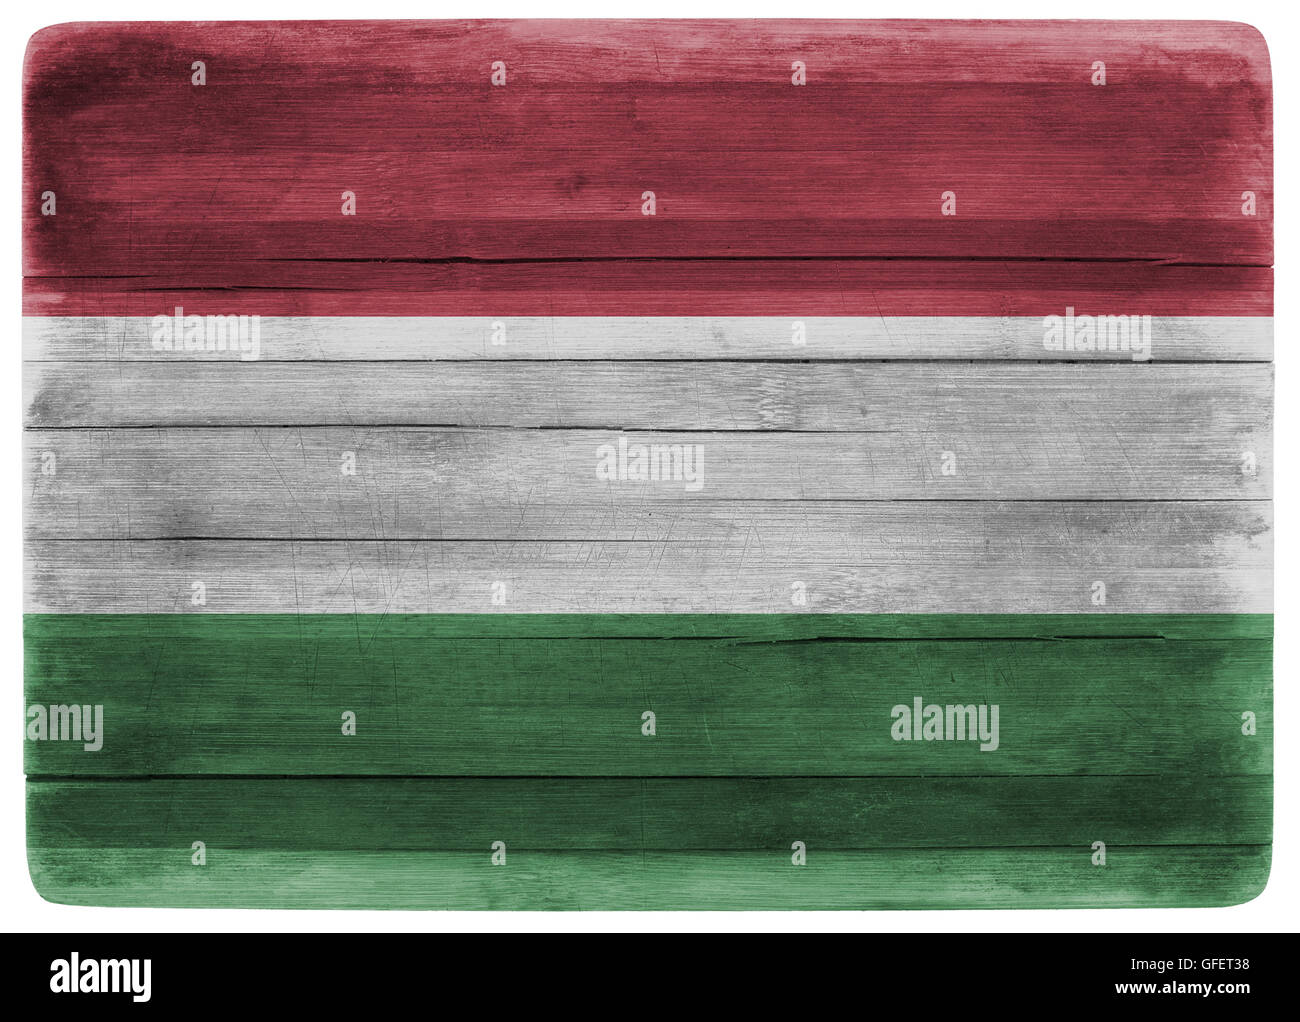 horizontal front view 3d illustration of an Hungary flag on wooden textured cooking board Stock Photo